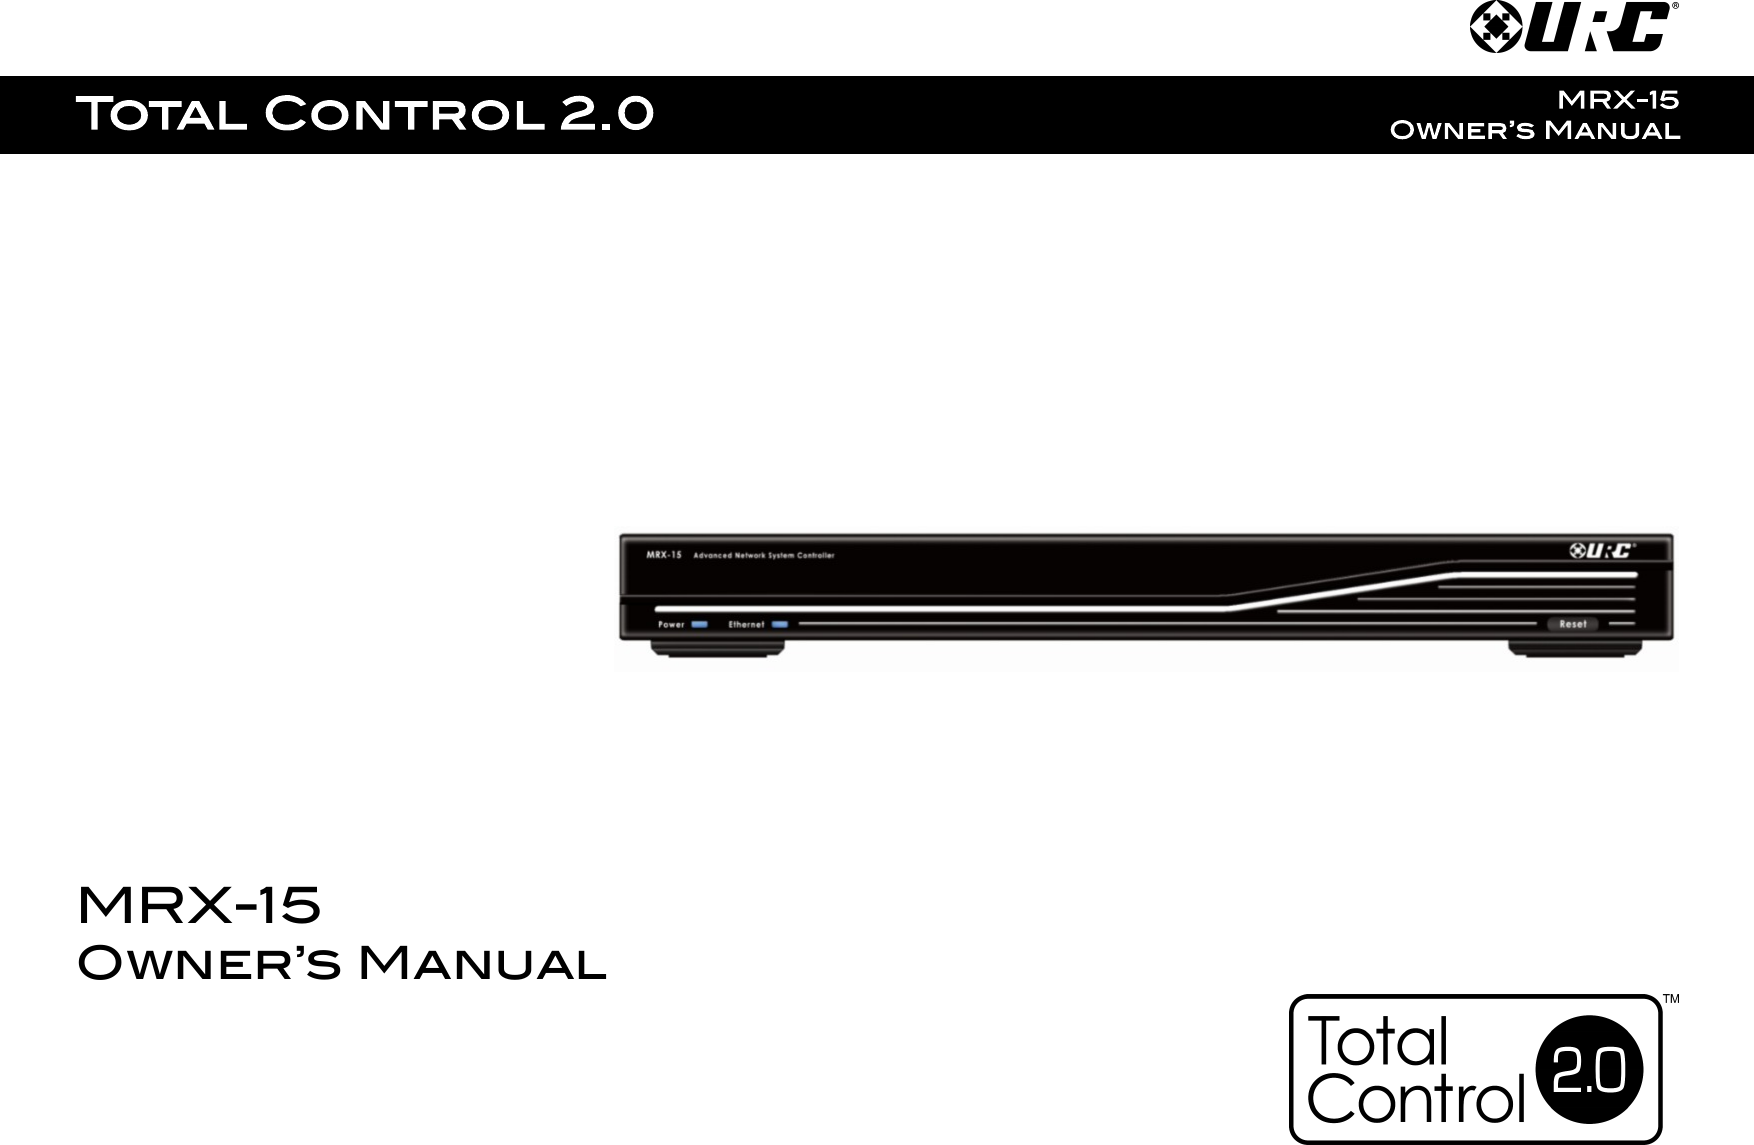 MRX-15Owner’s Manual